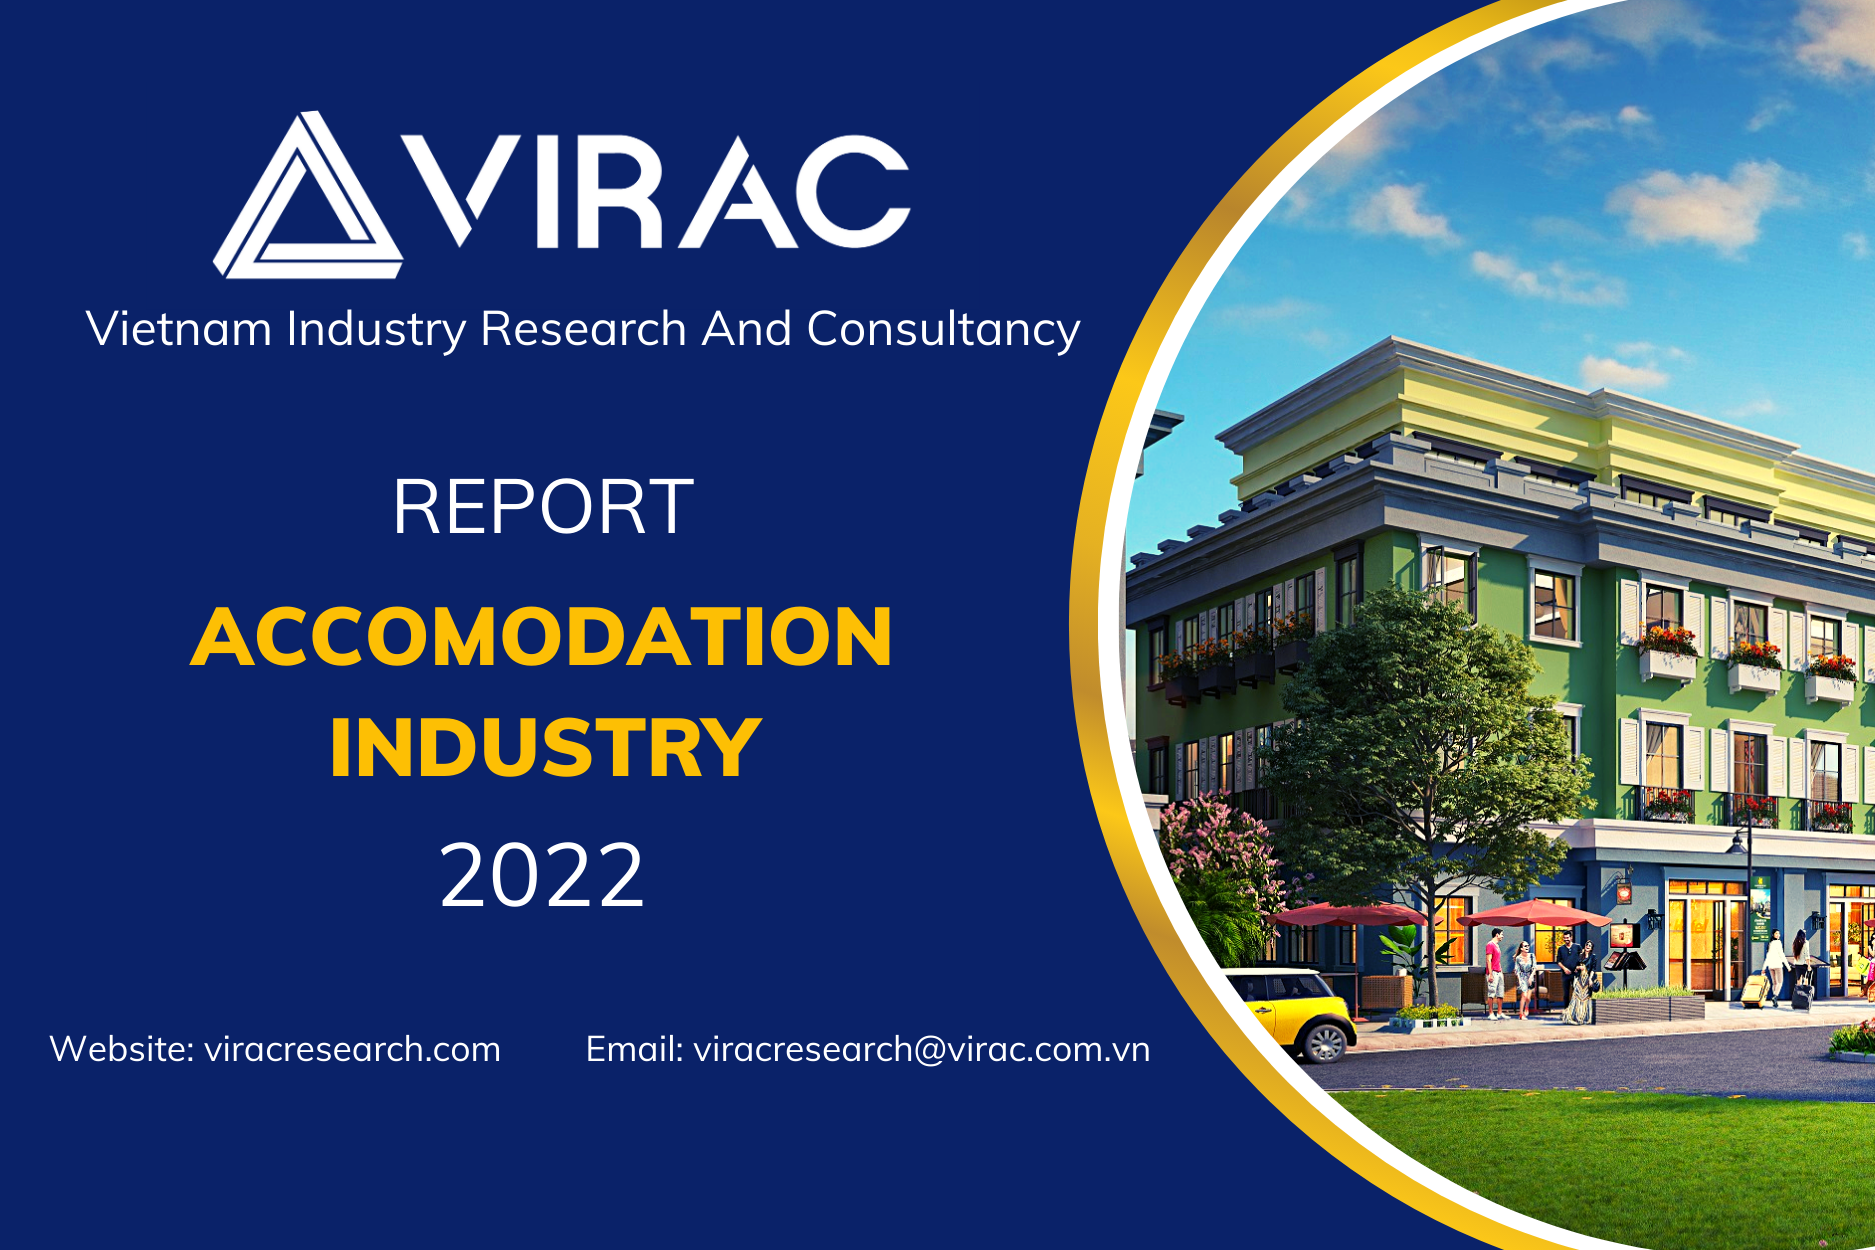 Accommodation annual report in 2022